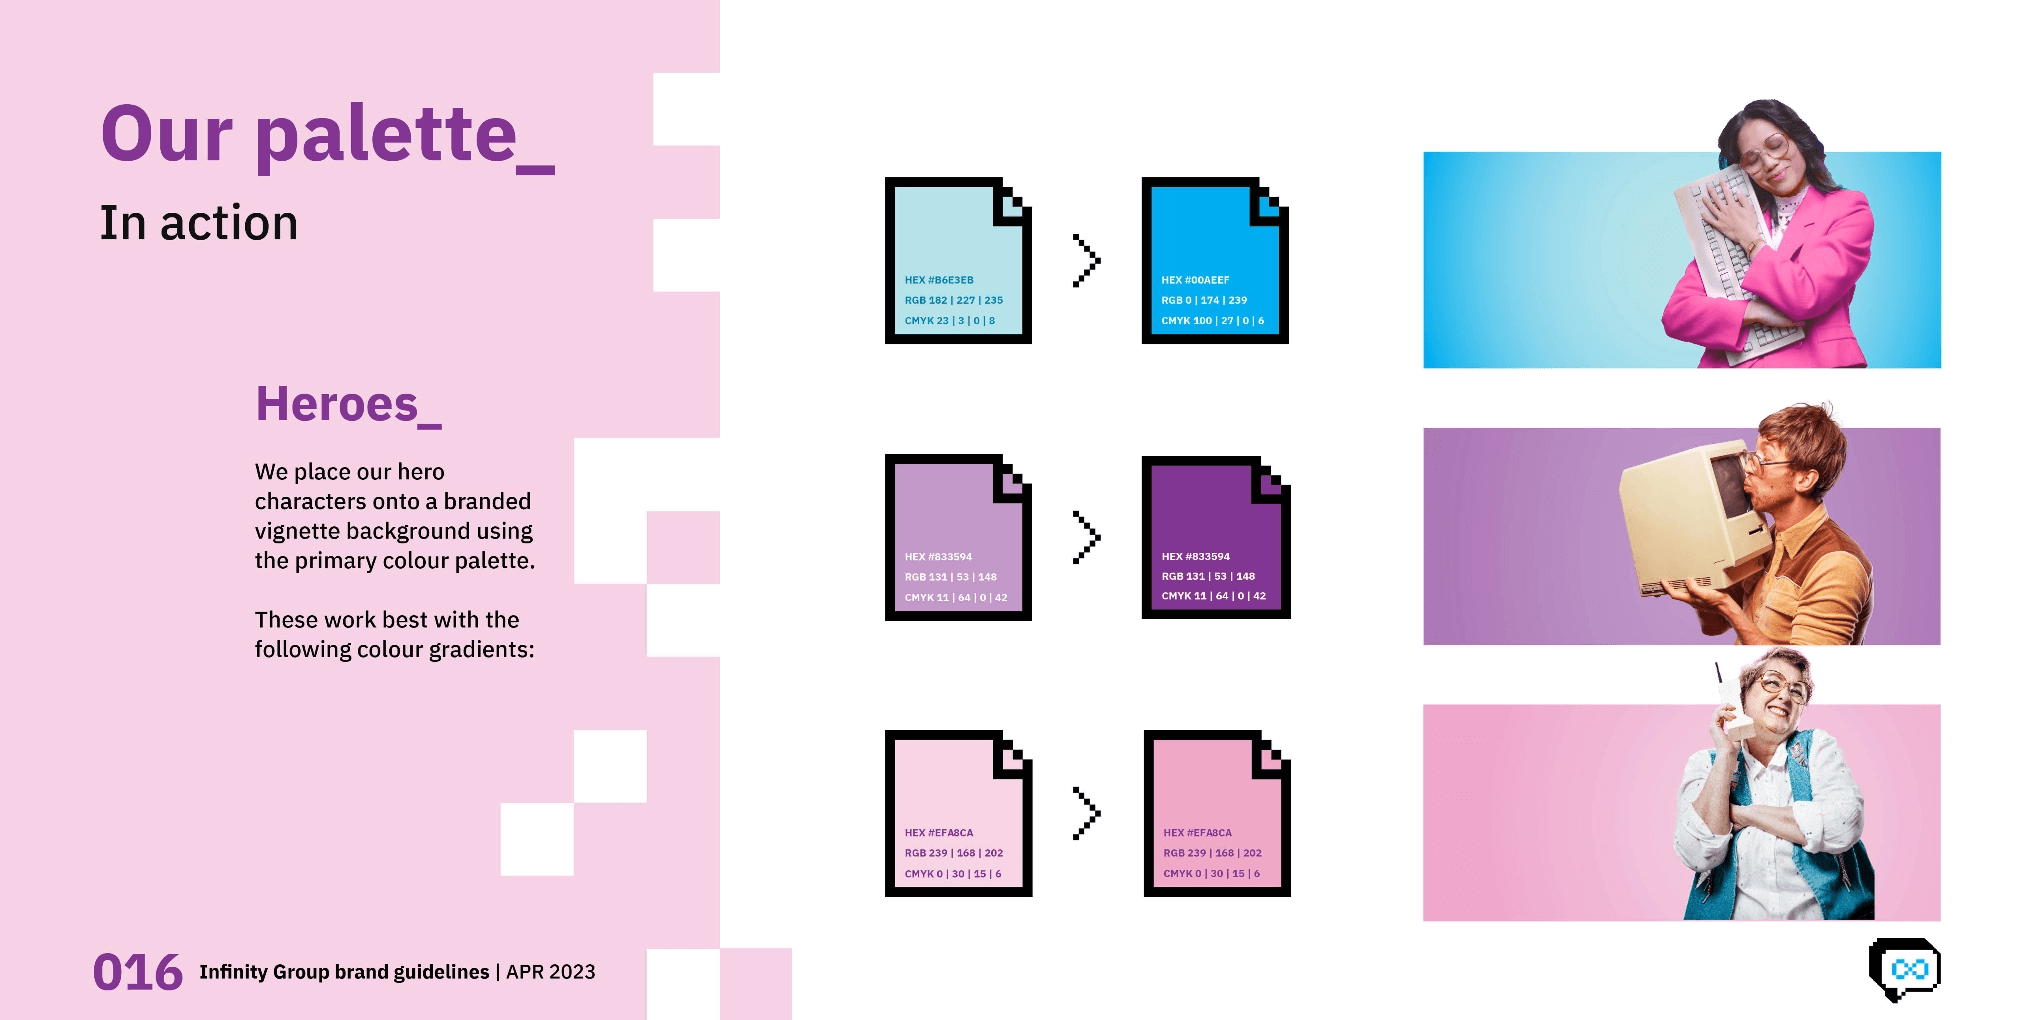 Infinity Group Brand Guidelines - Our palette 2